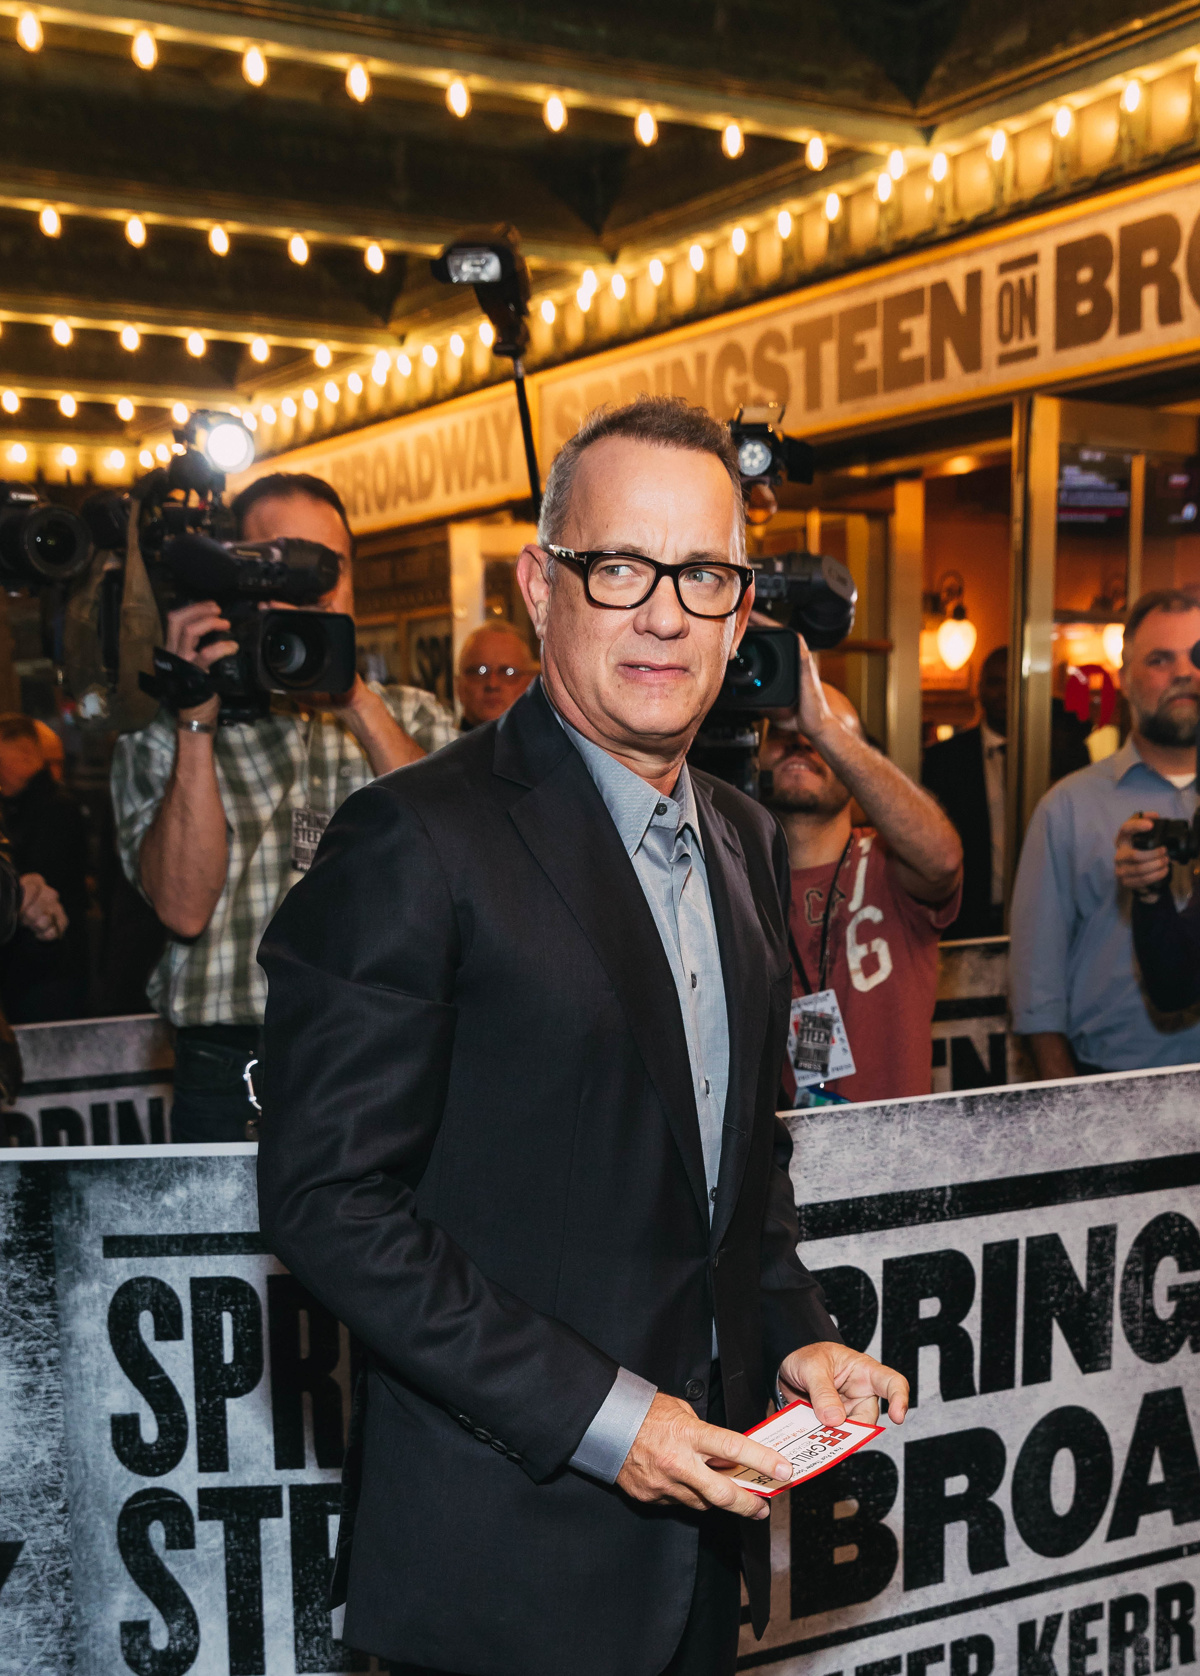 Glory Days! See Stars Step Out for Opening Night of Springsteen on Broadway | Broadway.com